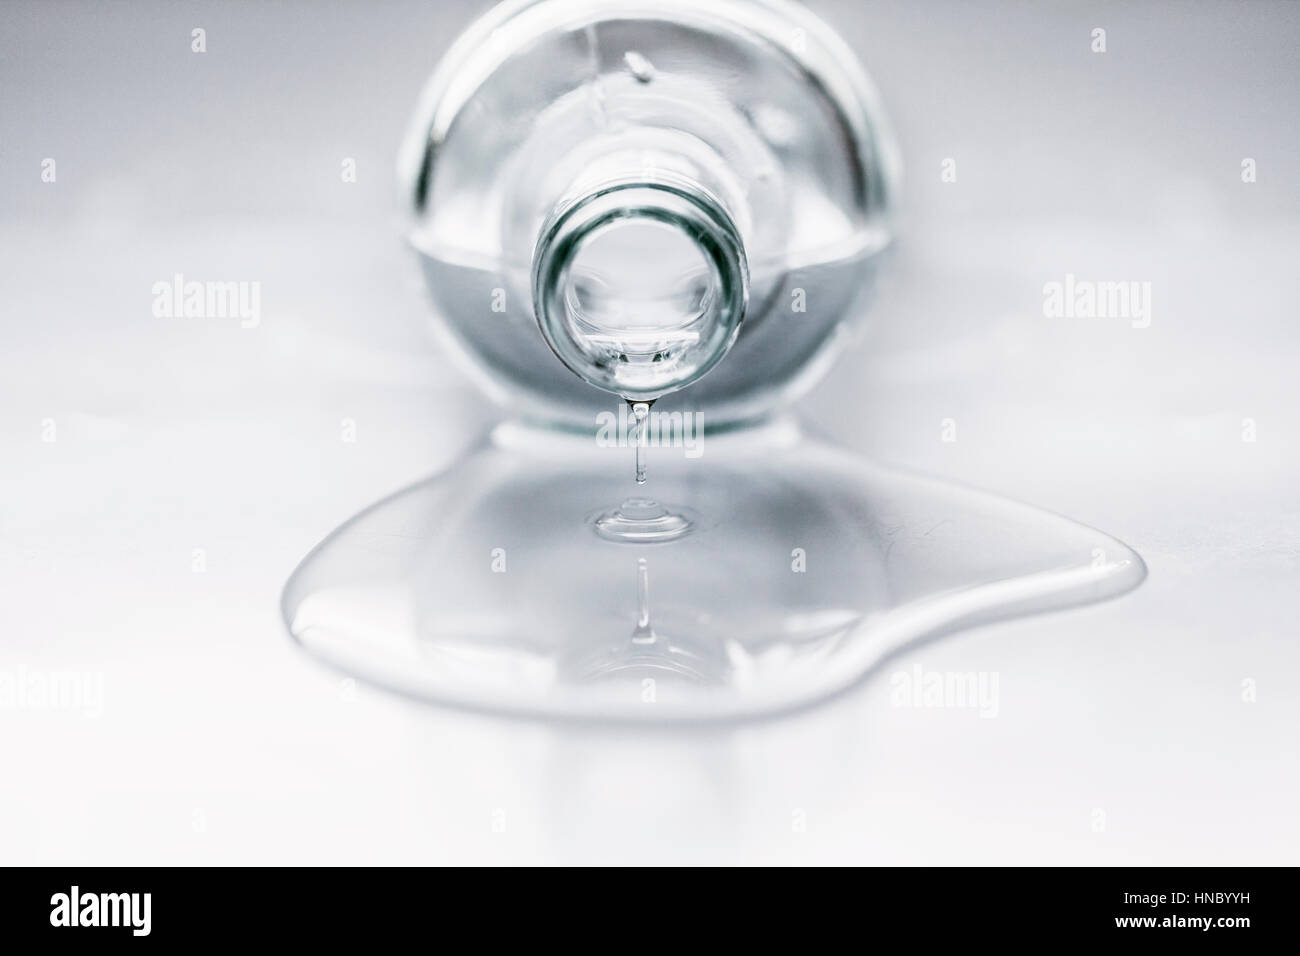 Bottle lying on table with water coming out Stock Photo